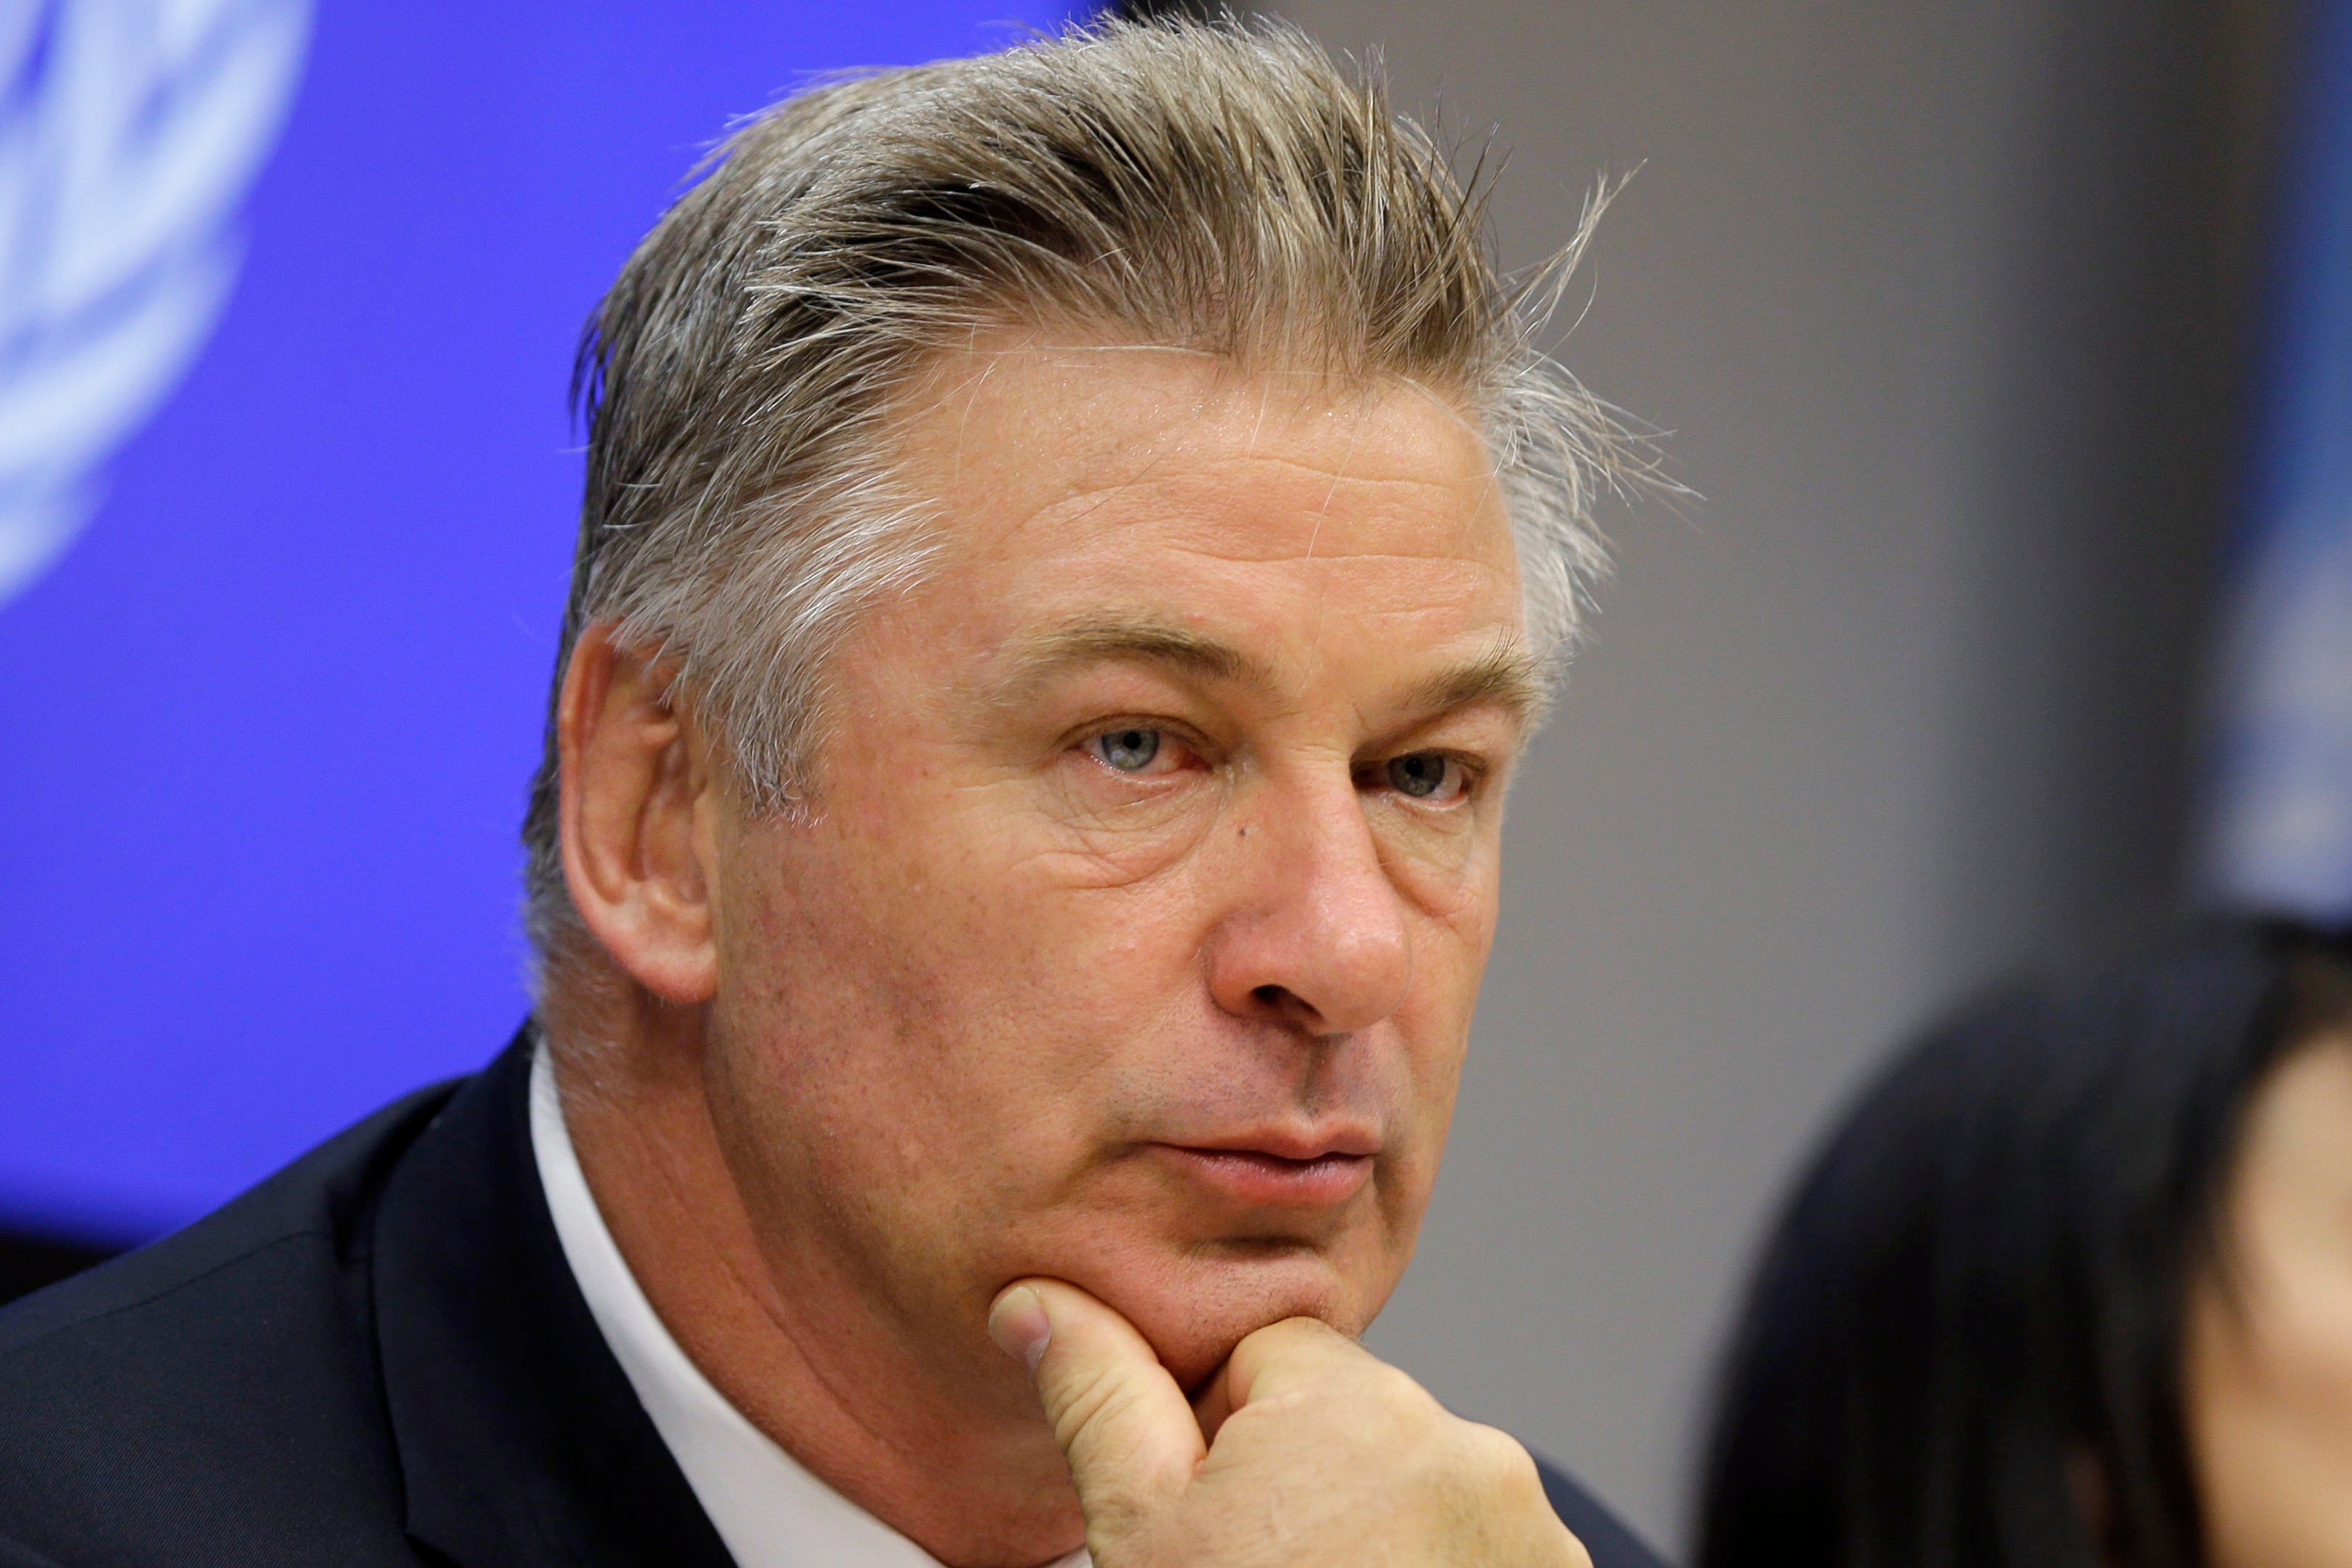 Alec Baldwin’s attorney says the charges are a ‘miscarriage of justice’